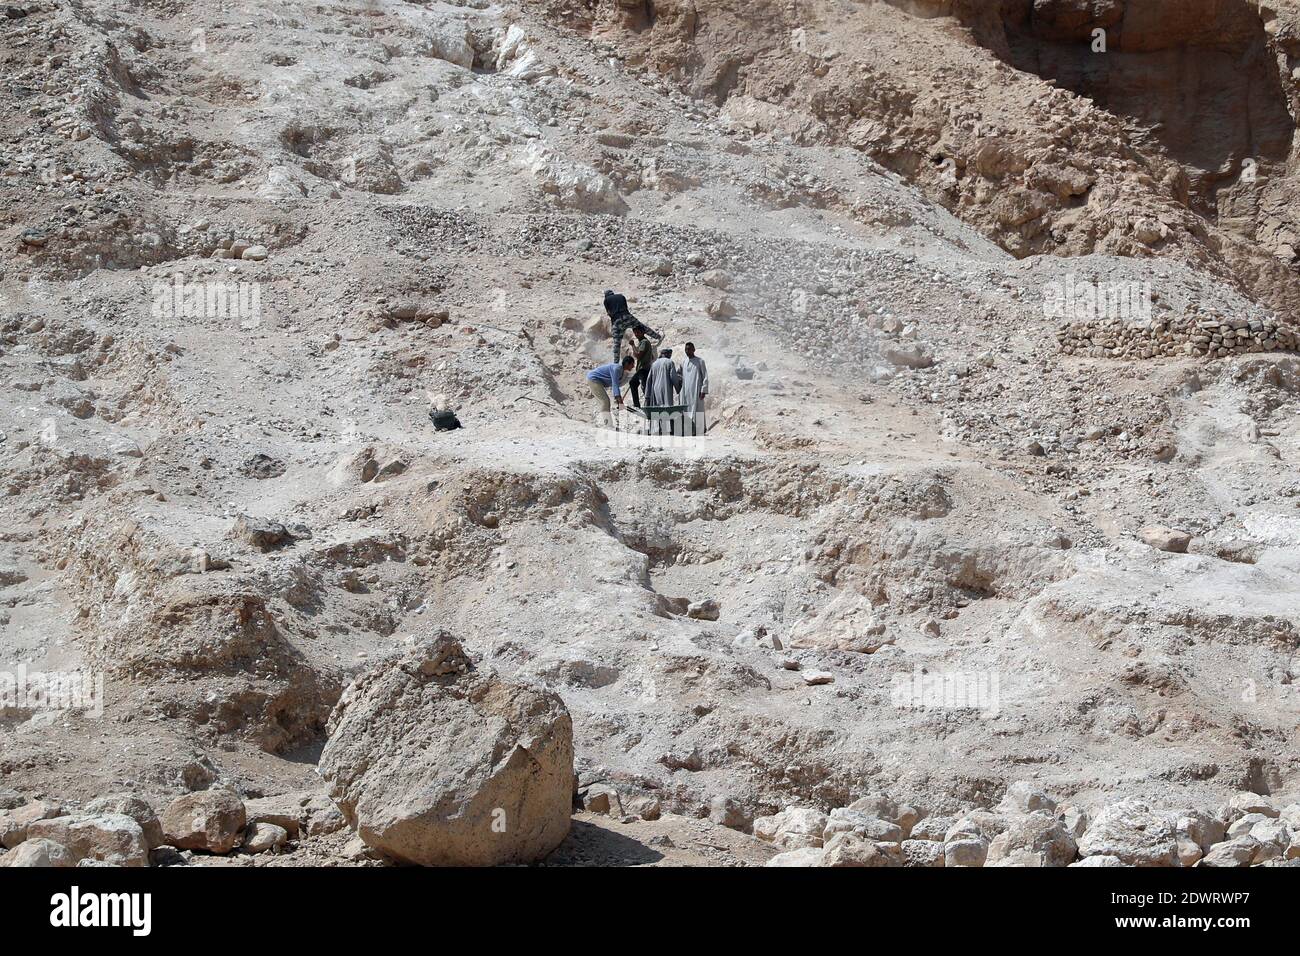 Luxor, Egypt. 10th Oct, 2019. Excavation workers are seen in Luxor, Egypt, Oct. 10, 2019. TO GO WITH 'Feature: With love of antiquities, Egyptian family devotes a century to excavation works' Credit: Ahmed Gomaa/Xinhua/Alamy Live News Stock Photo